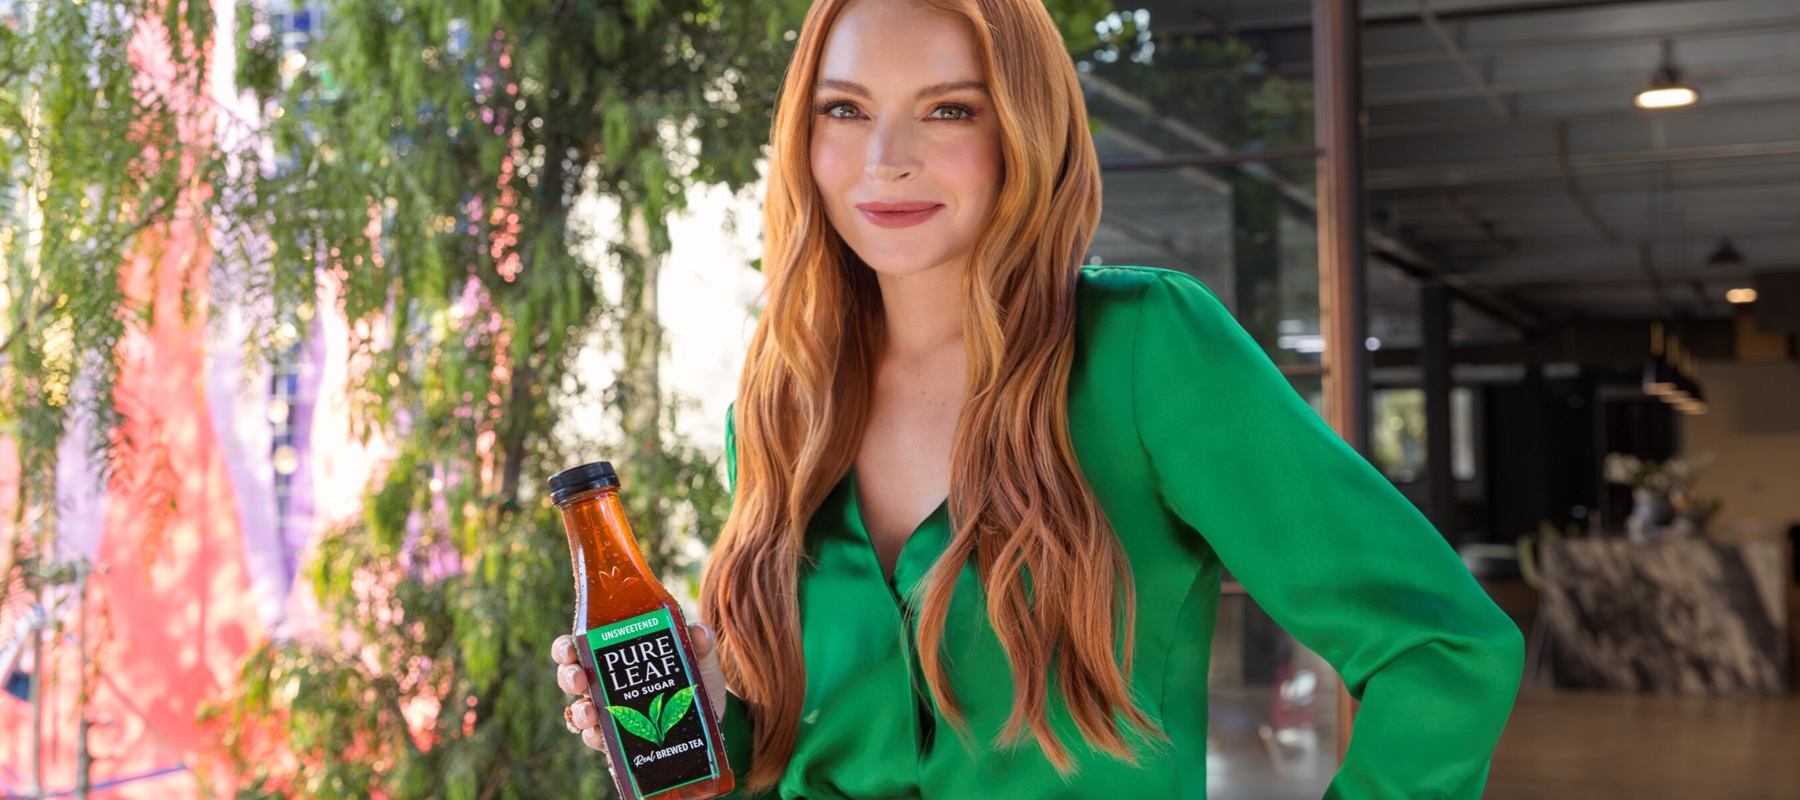 Pure Leaf and actress Lindsay Lohan launch campaign to promote tea break culture